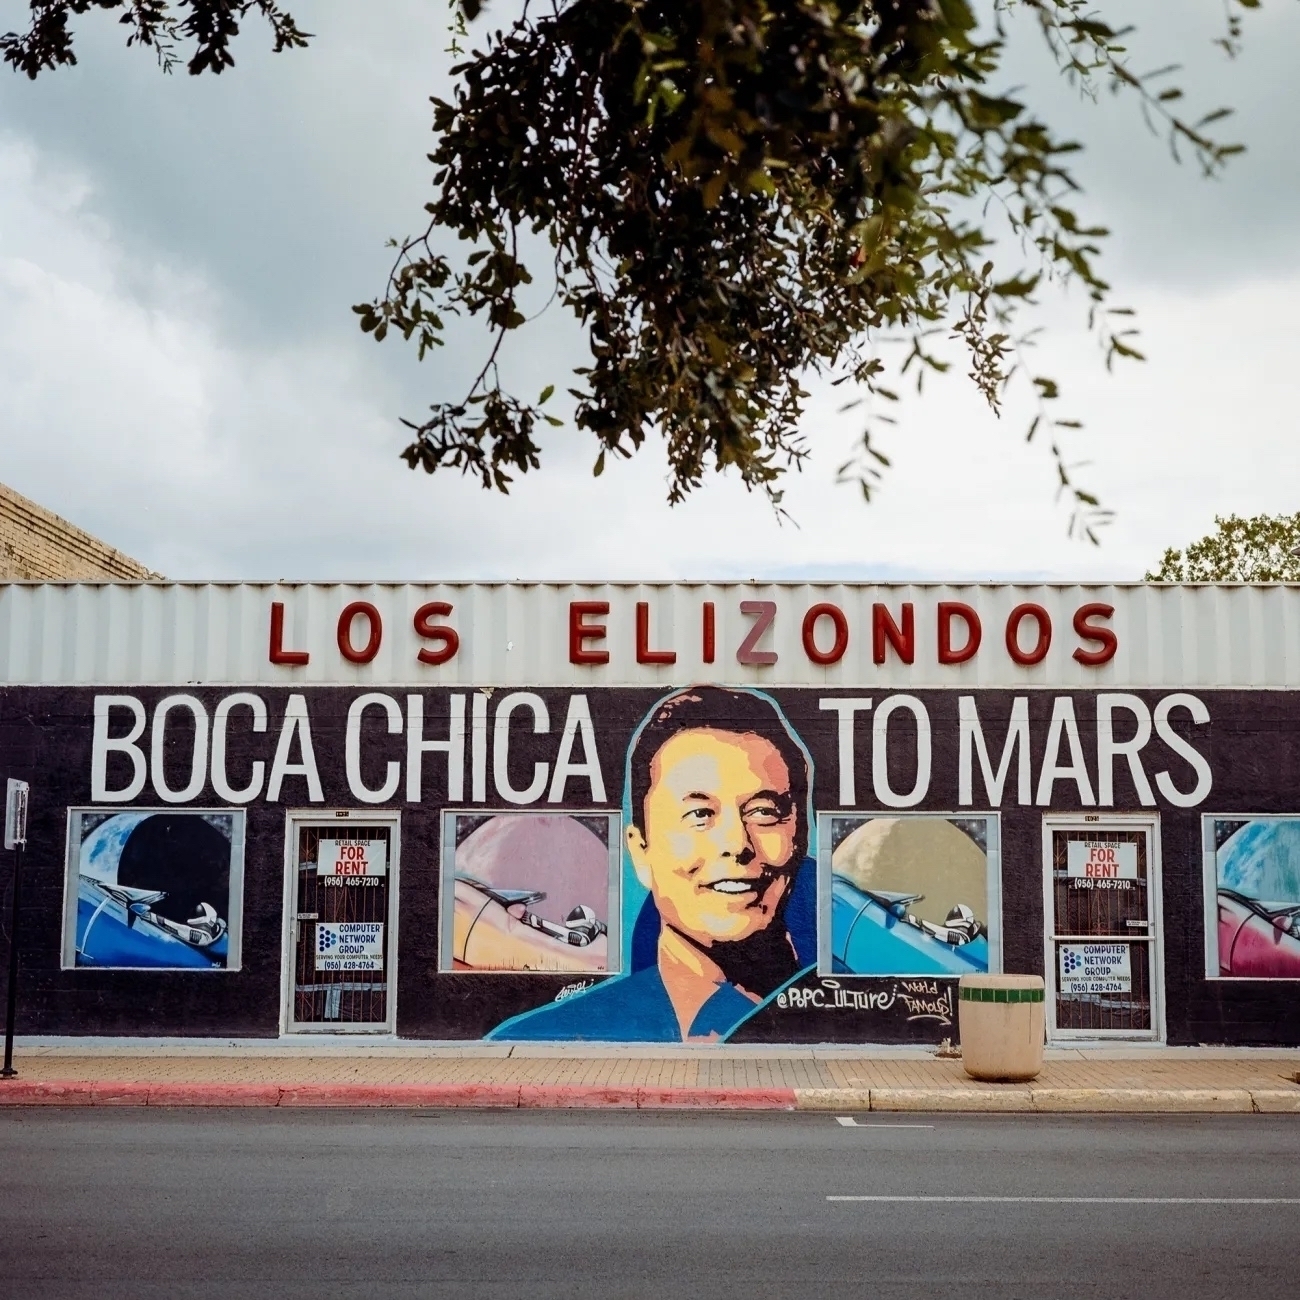 A building in Boca Chica with Musk's face painted in the font. The text says: LOS ELIZONDOS BOCA CHICA TO MARS